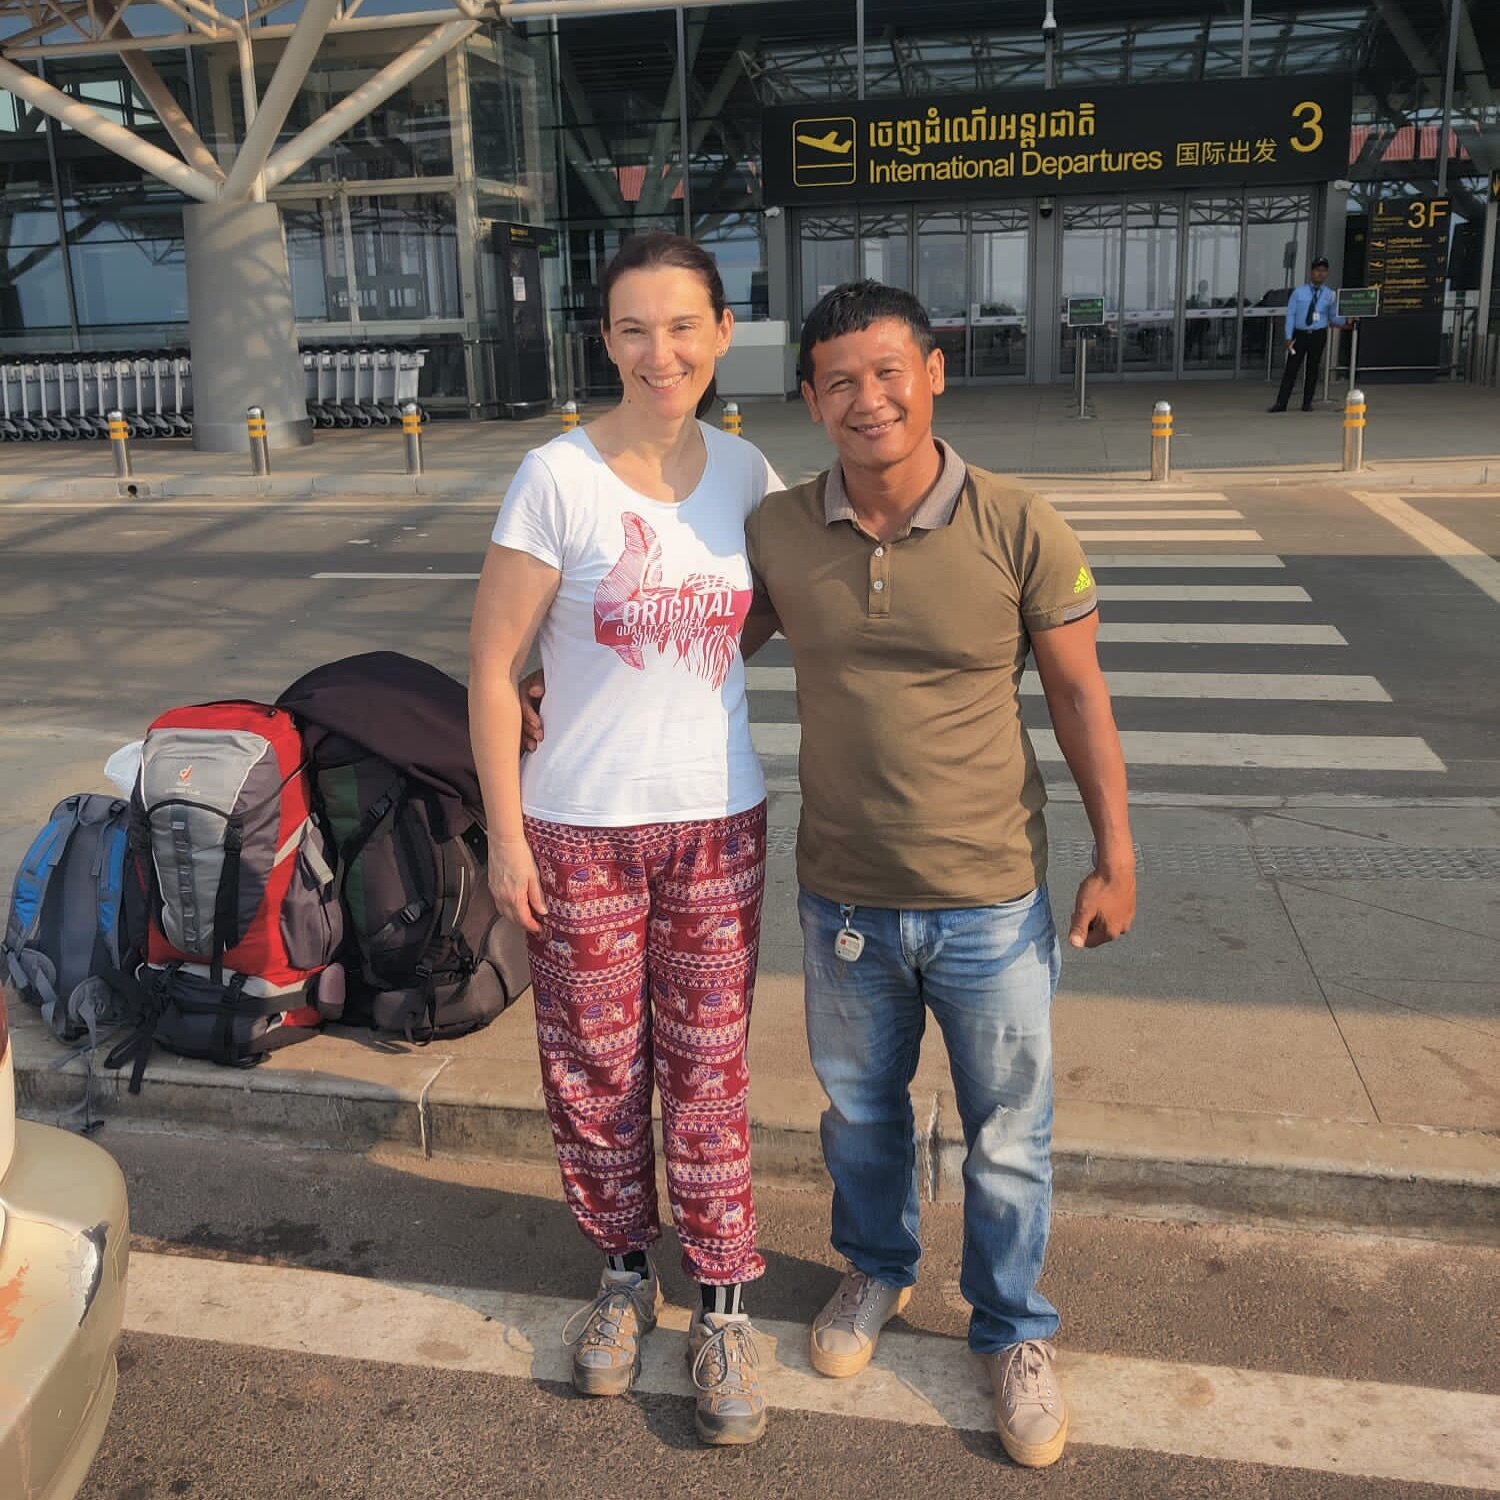 I have the best job because I meet nice people all around the world. Thank you for choosing me to drive your tours in Siem Reap! #angkorwatdriver #siemreapdriver